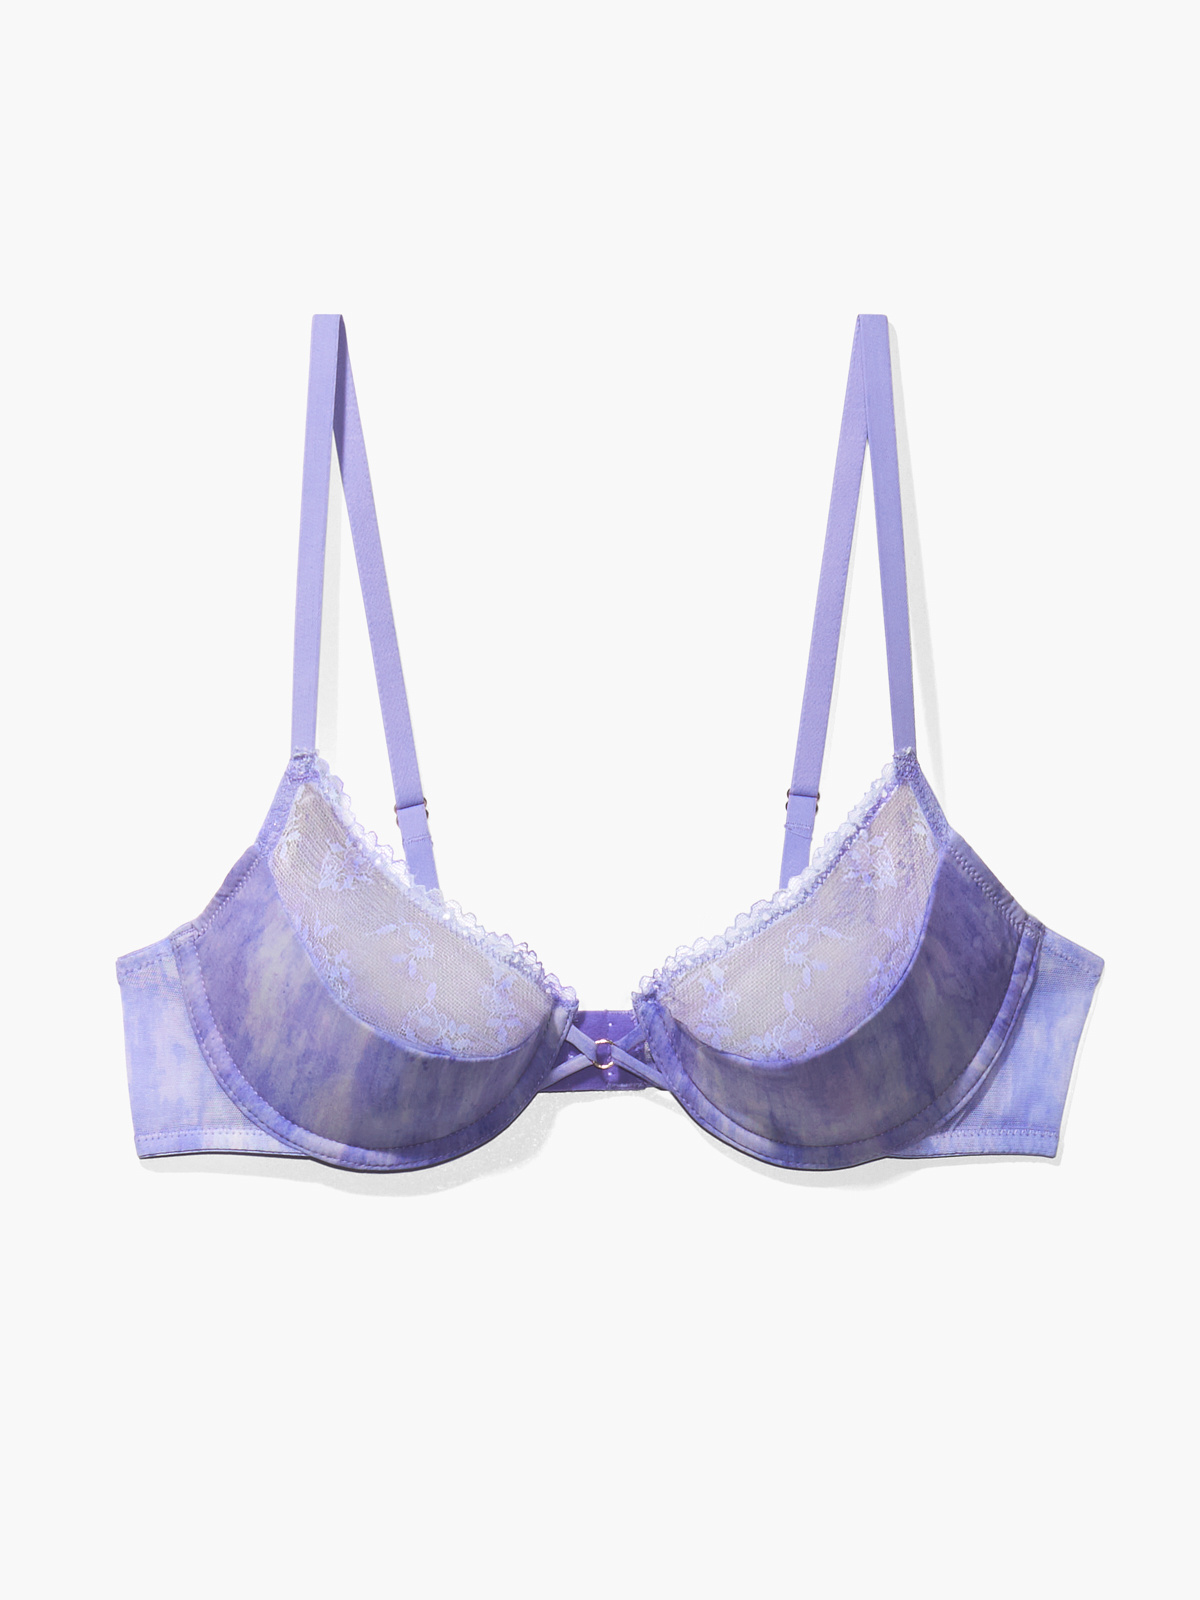 Watercolor Tie Dye Half Cup Bra with Lace